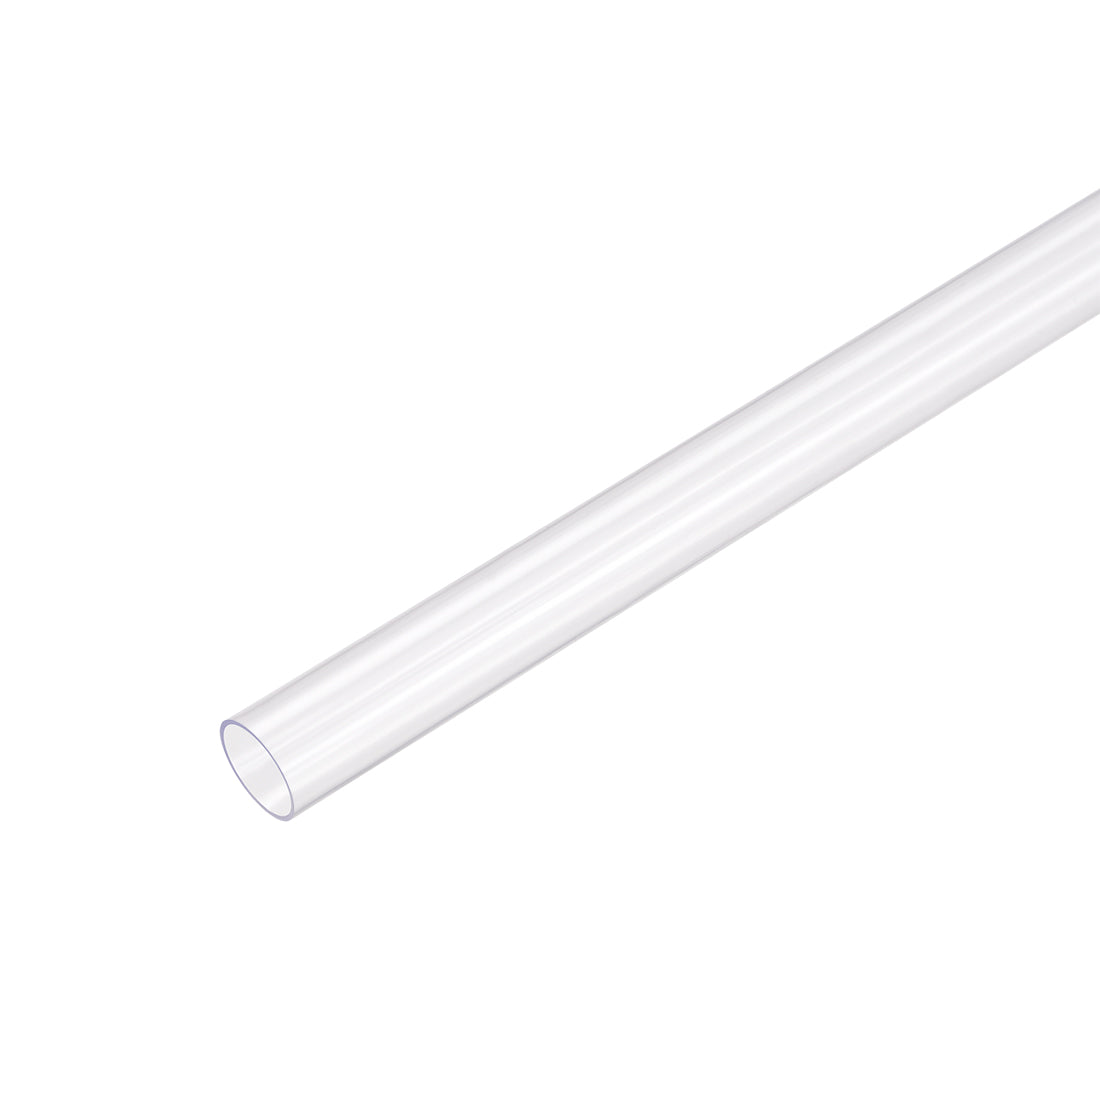 uxcell Uxcell PC Rigid Round Clear Tubing, 8mm(5/16") ID x 10mm(3/8") OD 0.5m Plastic Tube